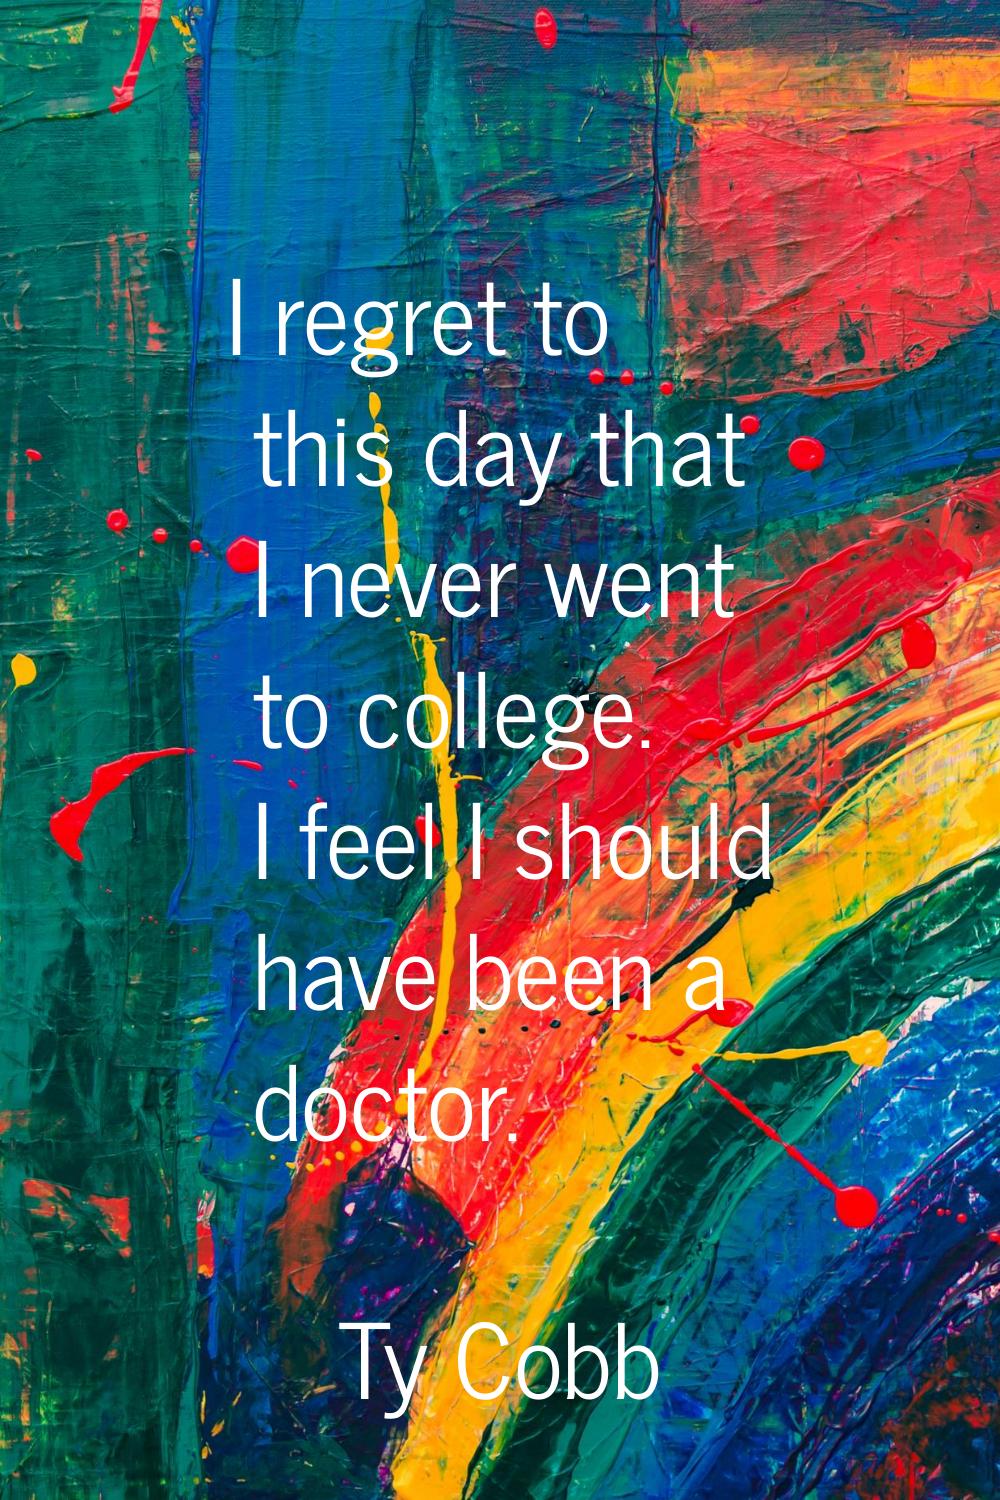 I regret to this day that I never went to college. I feel I should have been a doctor.